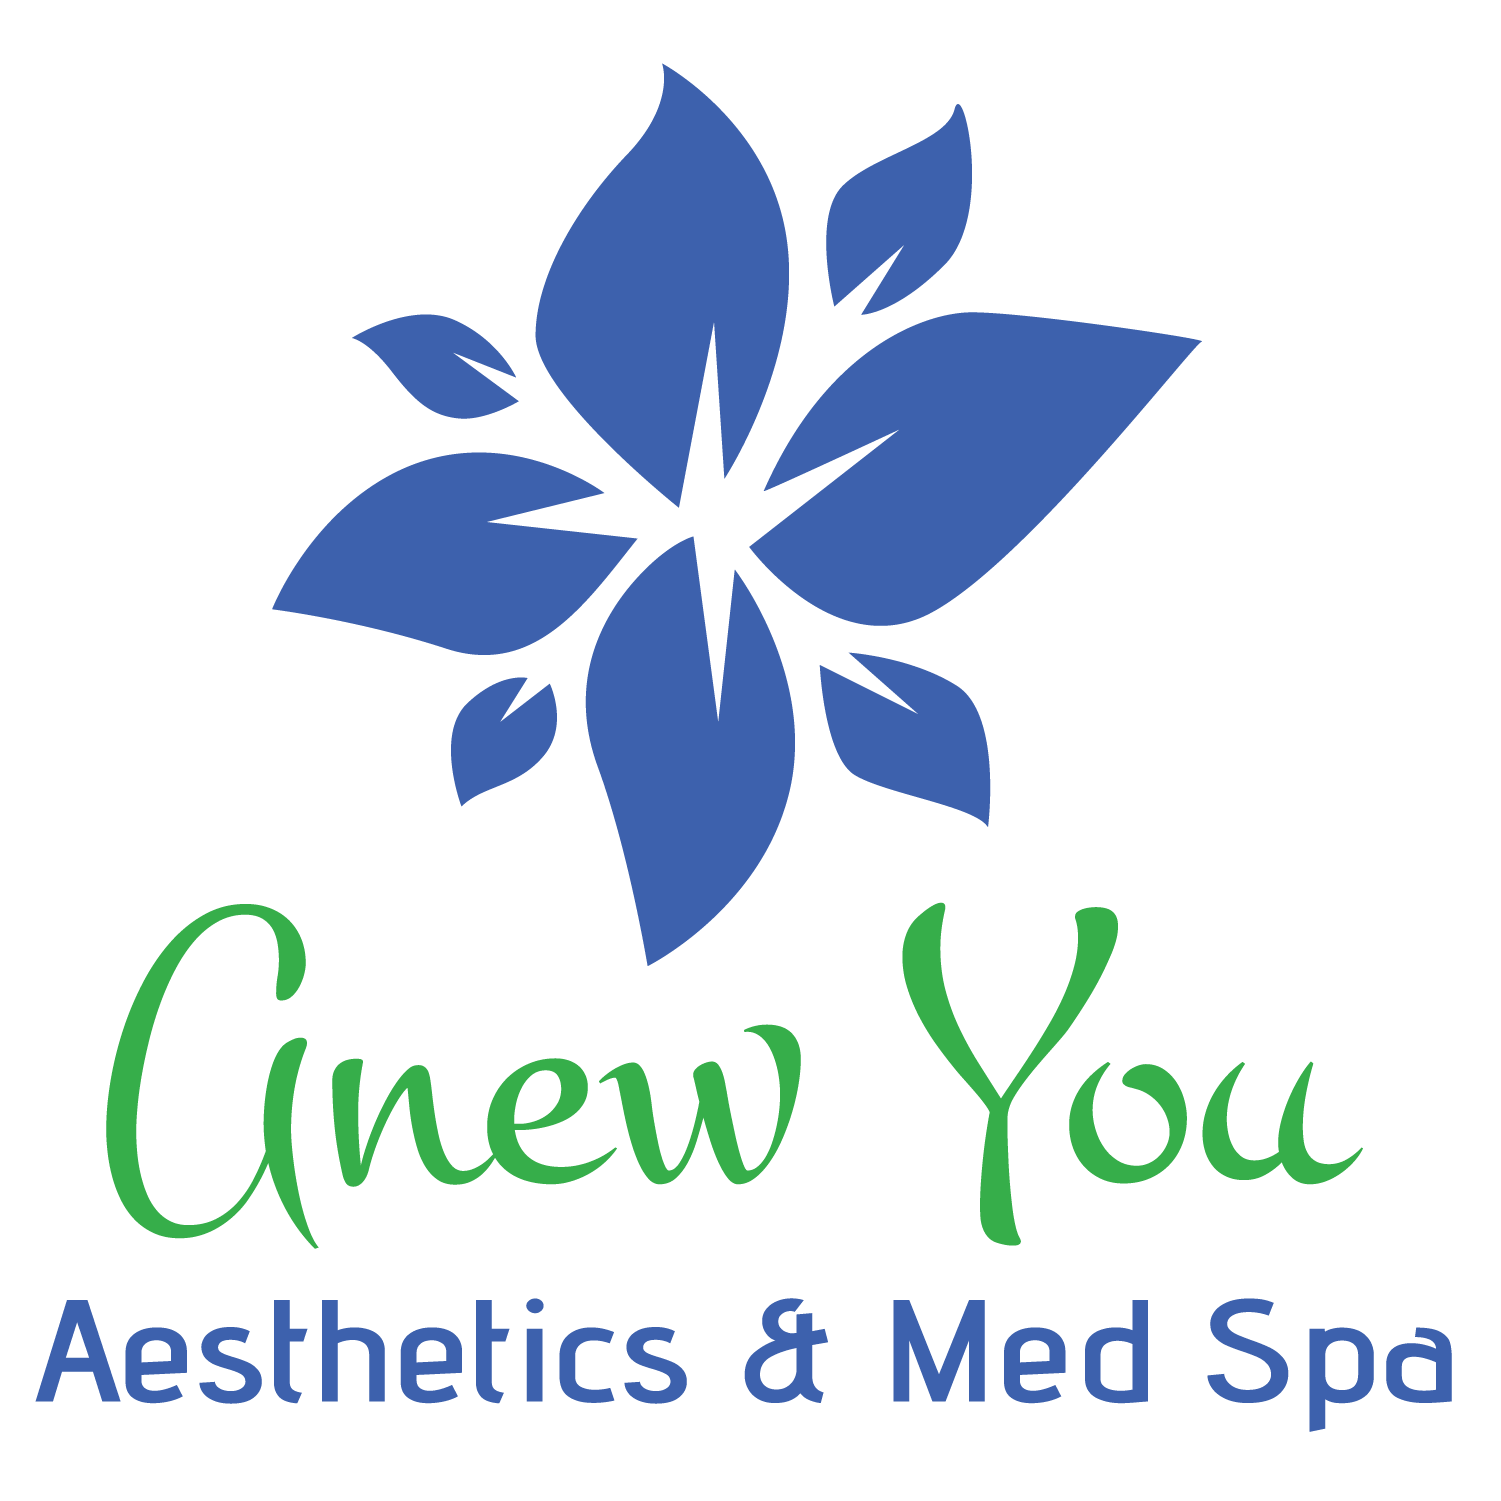 Anew You Aesthetics and Med Spa logo